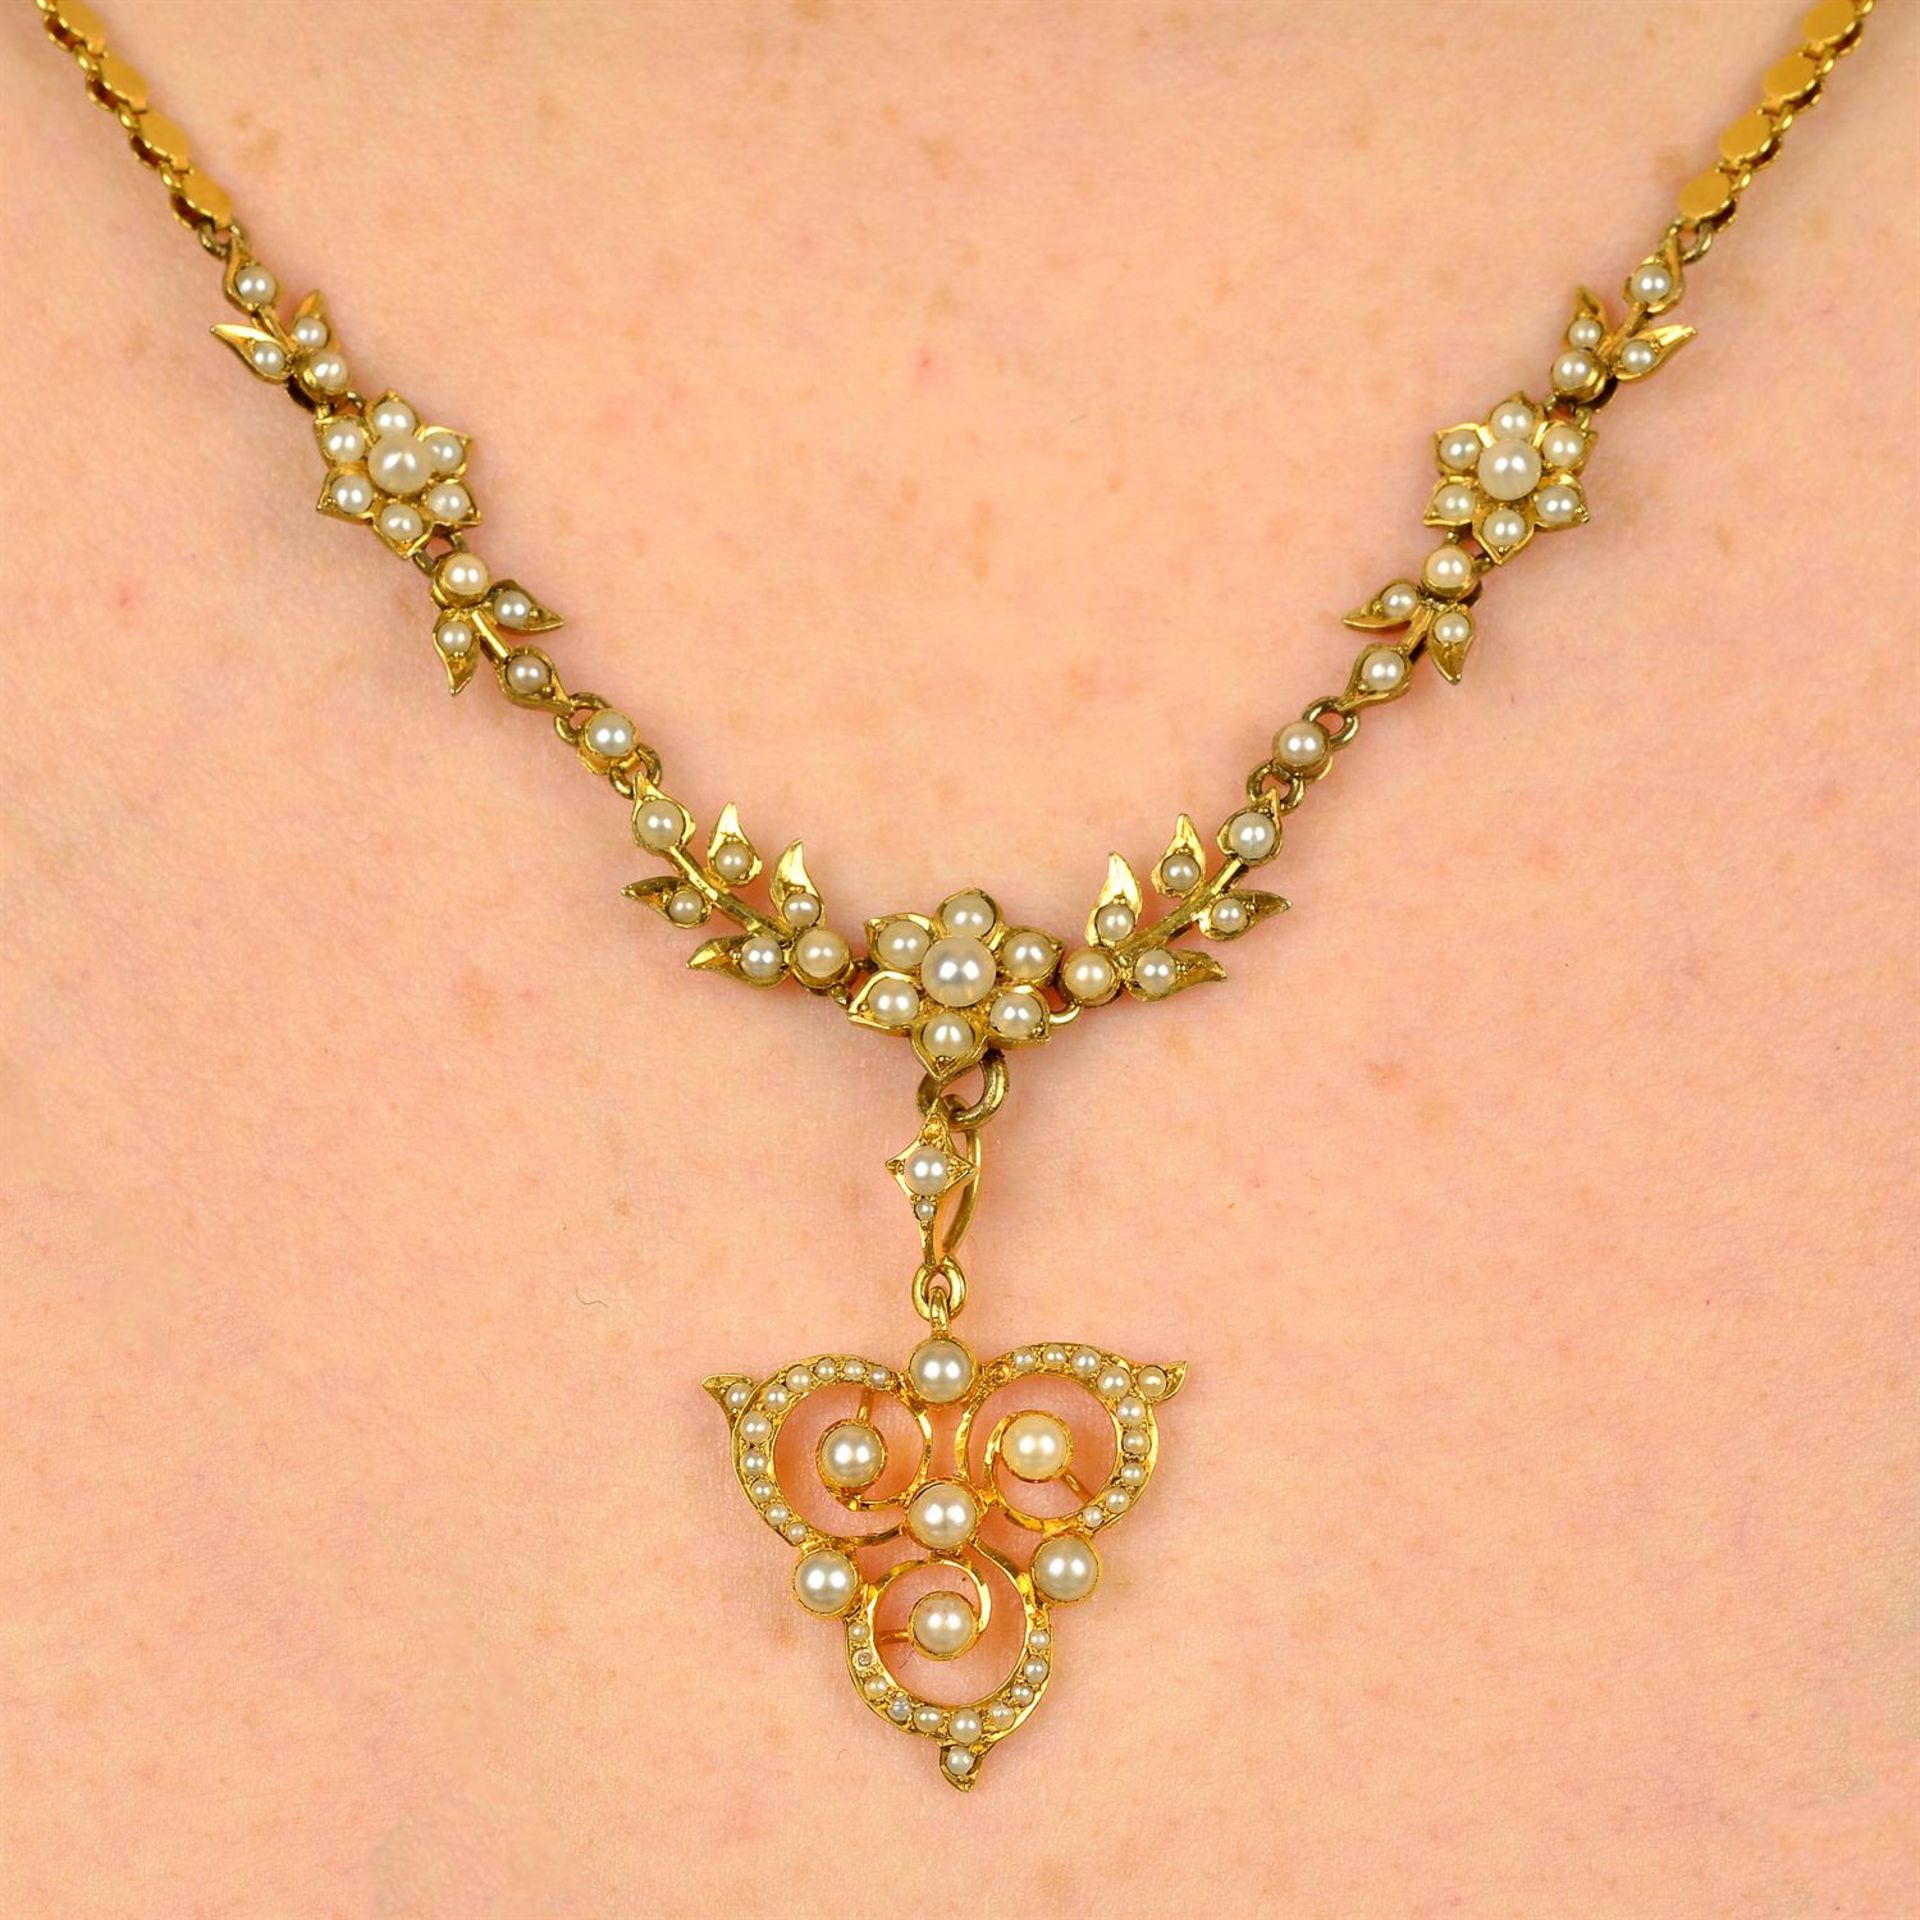 A composite early 20th century gold split pearl necklace, with detachable pendant.